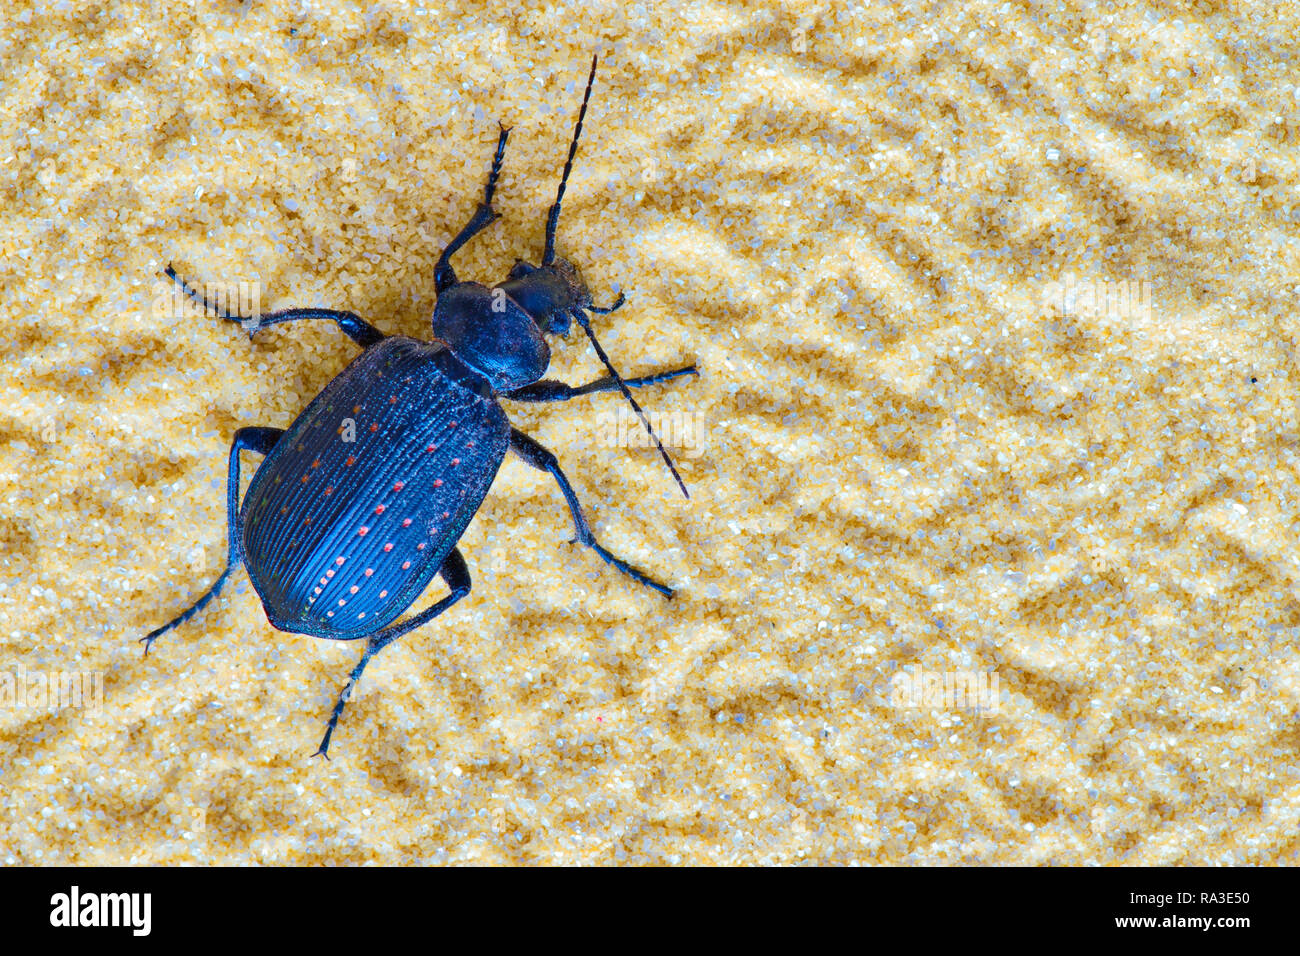 A black Fiery Hunter Beetle (Callisthenes calidus) isolated in light colored brown sand. Stock Photo